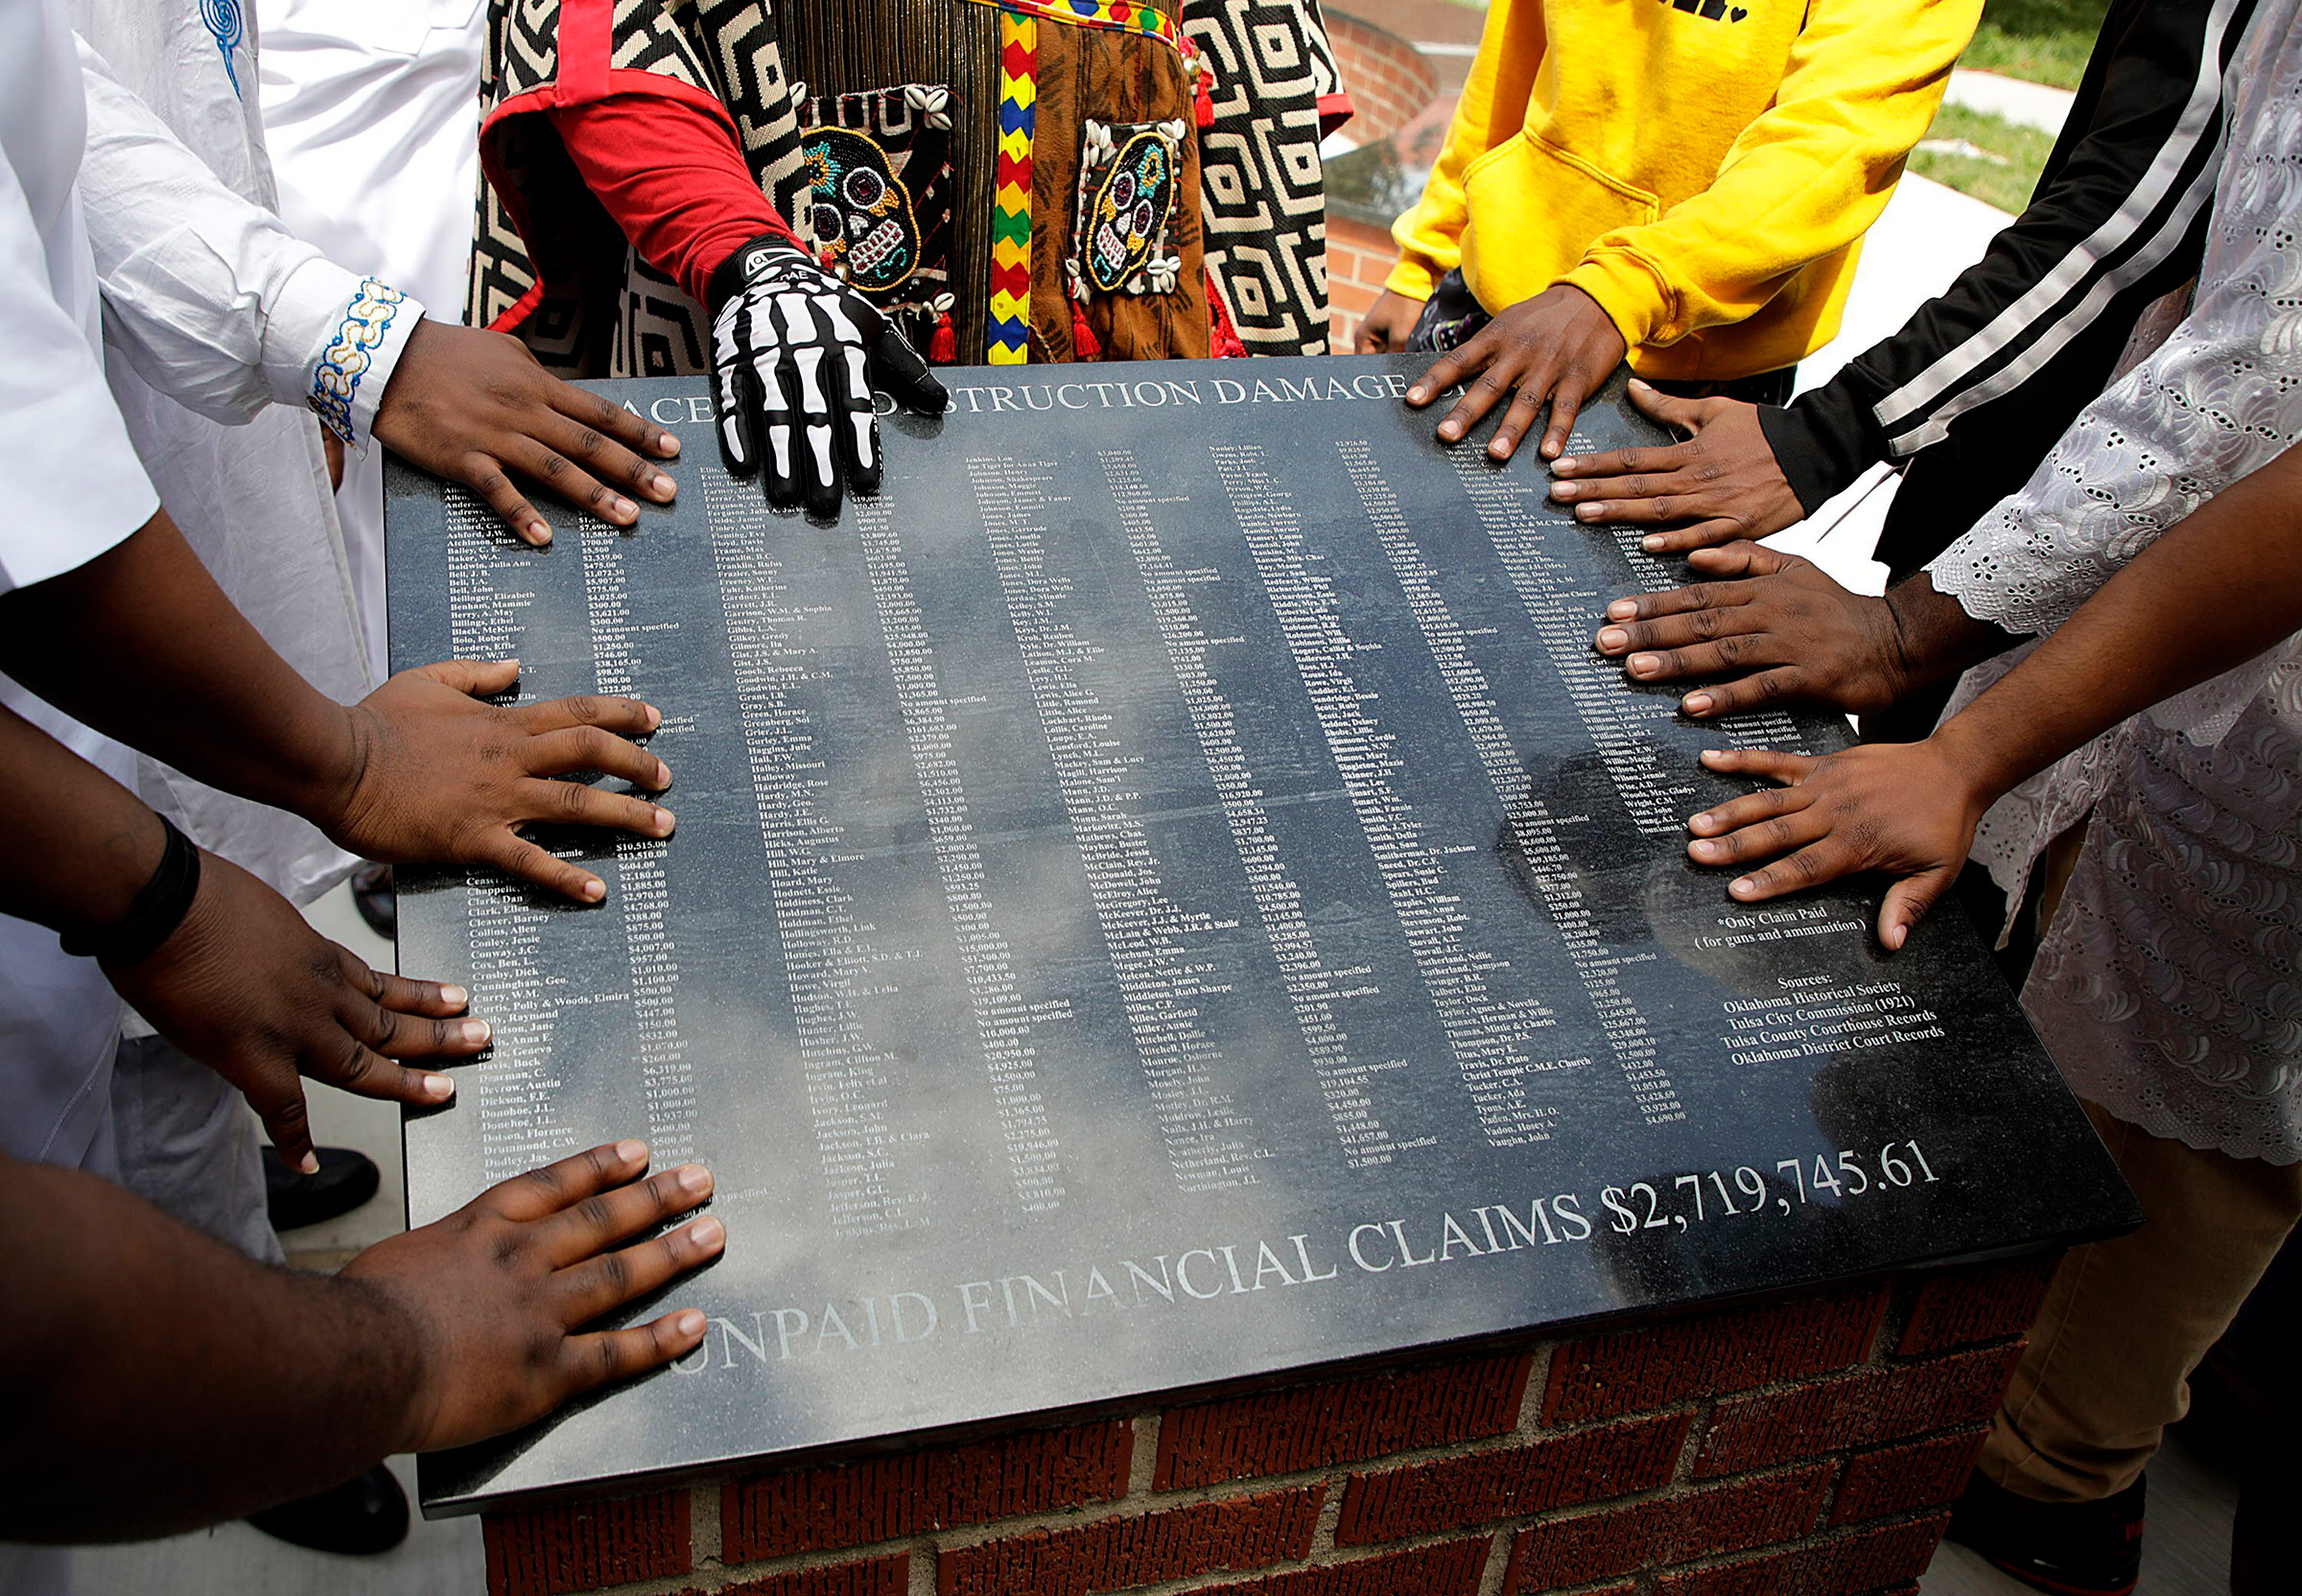 Members of the African Ancestral Society touch the 1921 Black Wall Street Memorial during the Black Wall Street Memorial March in Tulsa, Okla., on May 28, 2021.